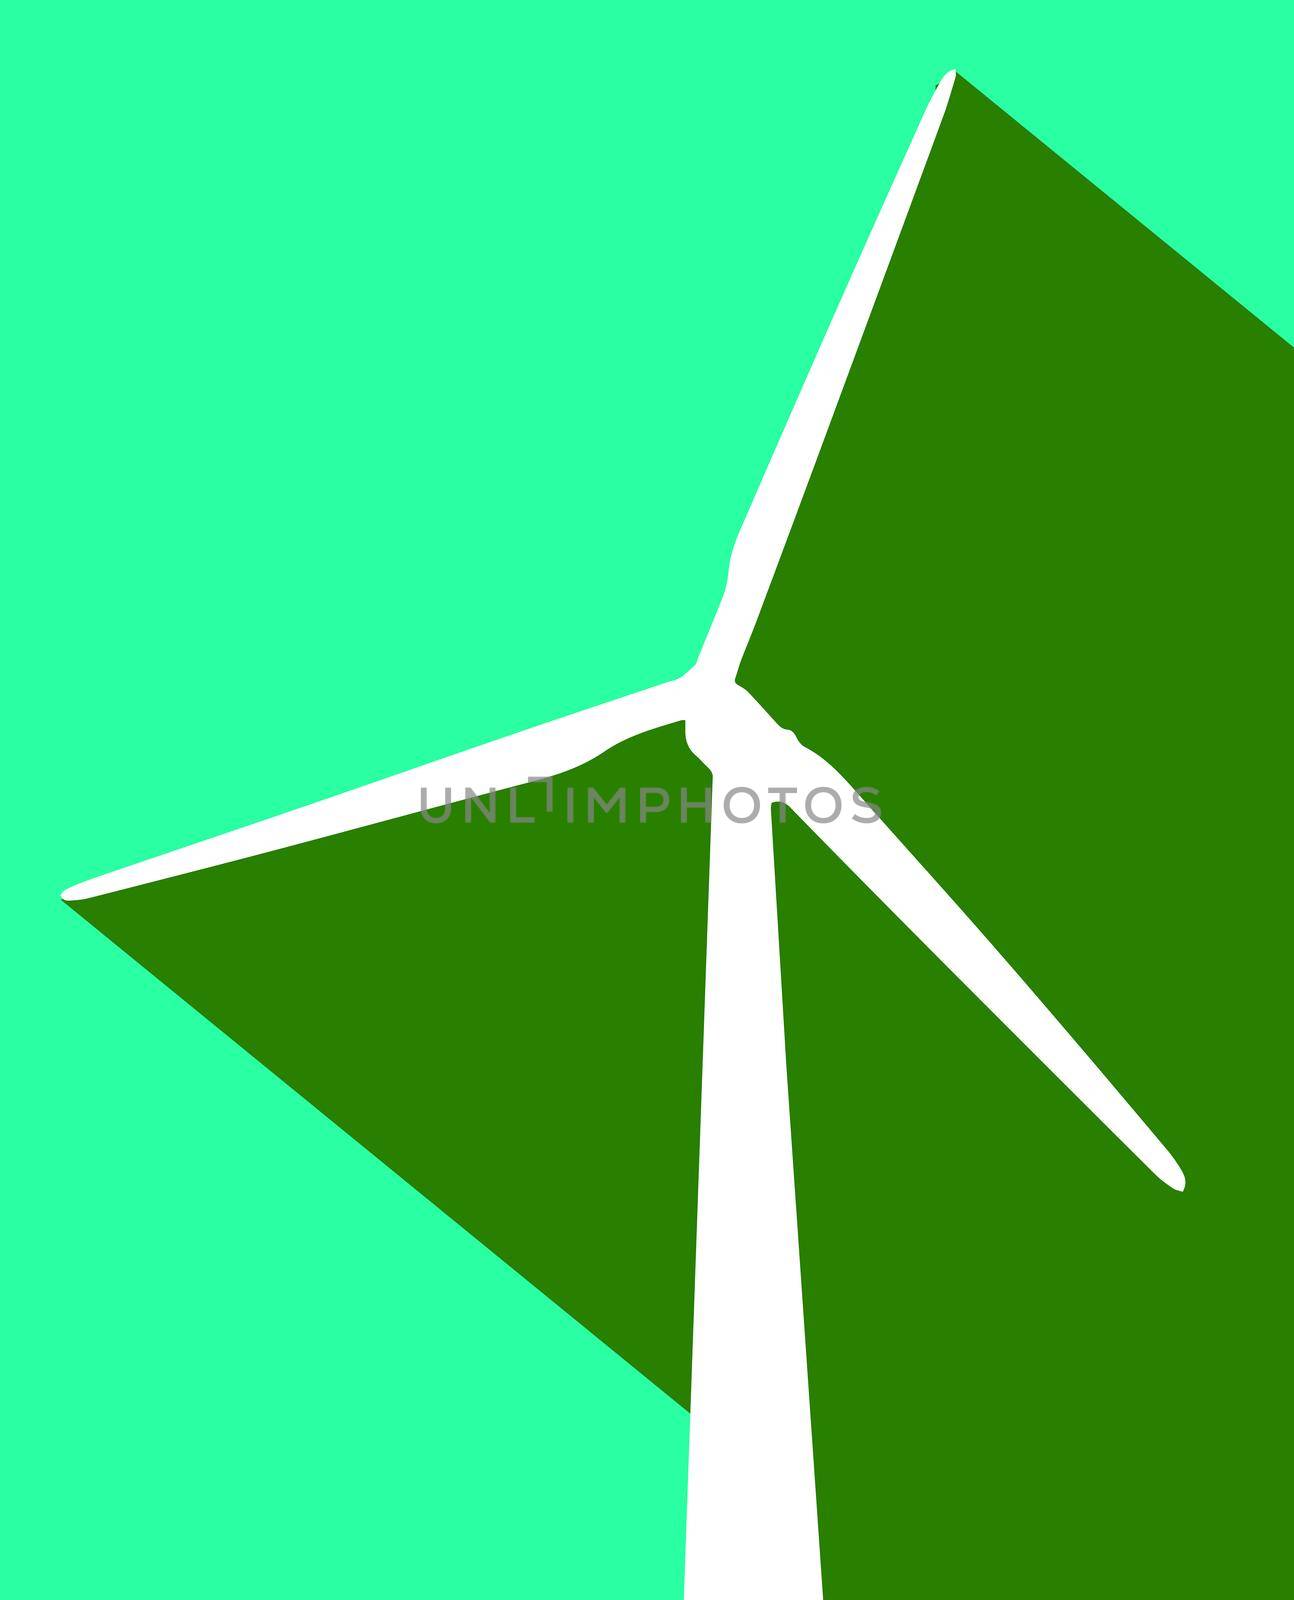 A wind powered generator in white silhouette set over a two tone green shadow background